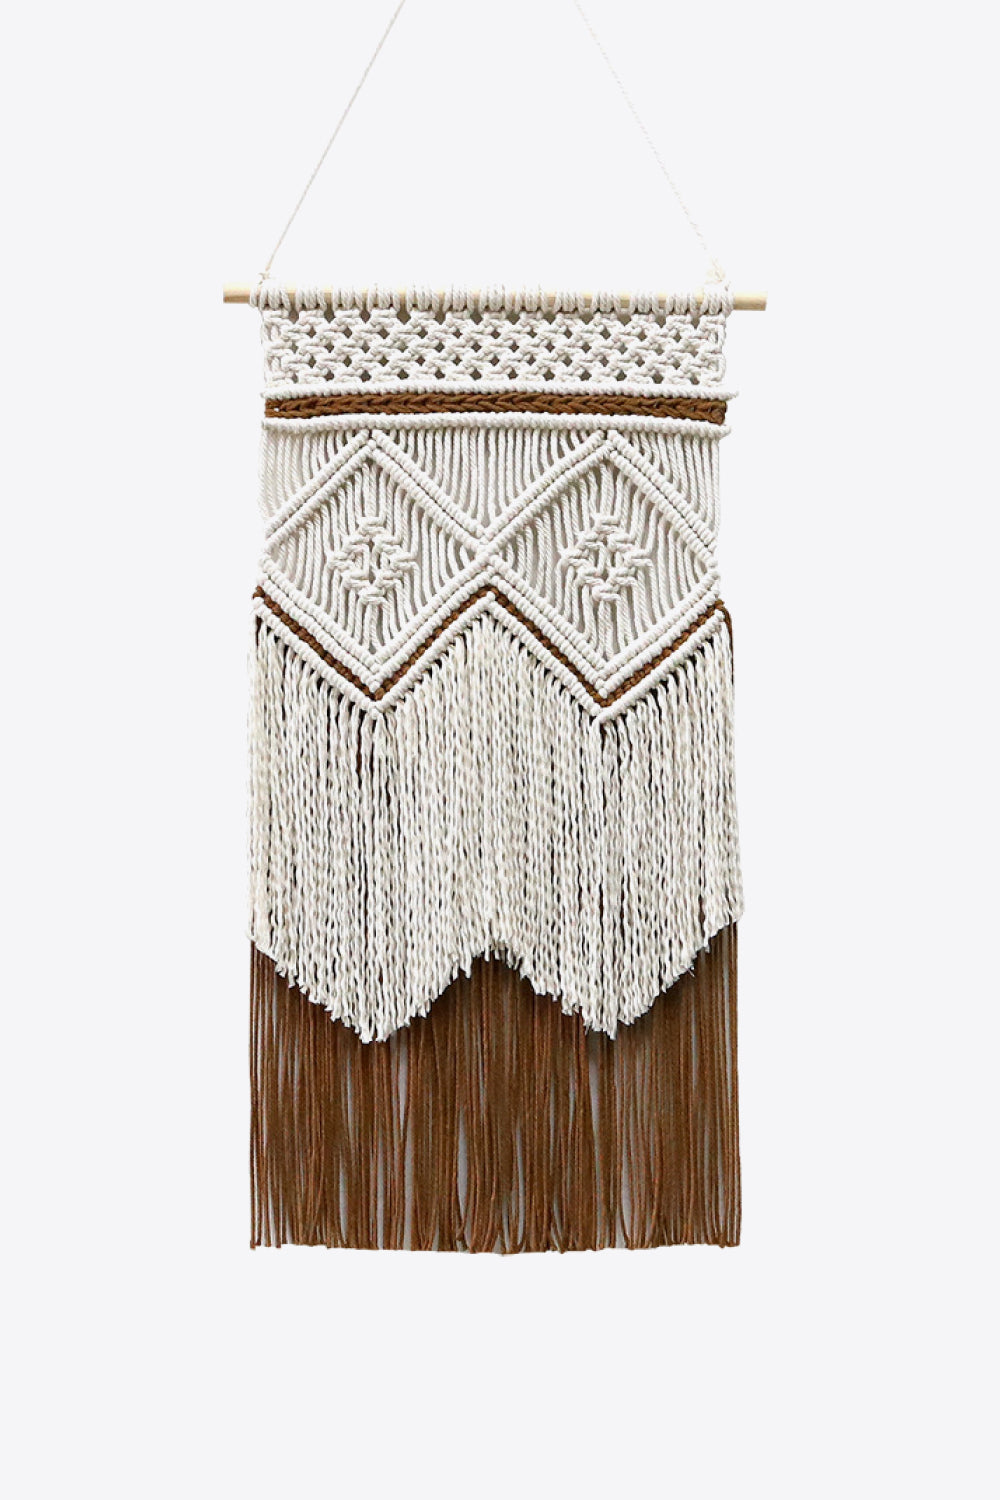 Two-Tone Handmade Macrame Wall Hanging Print on any thing USA/STOD clothes